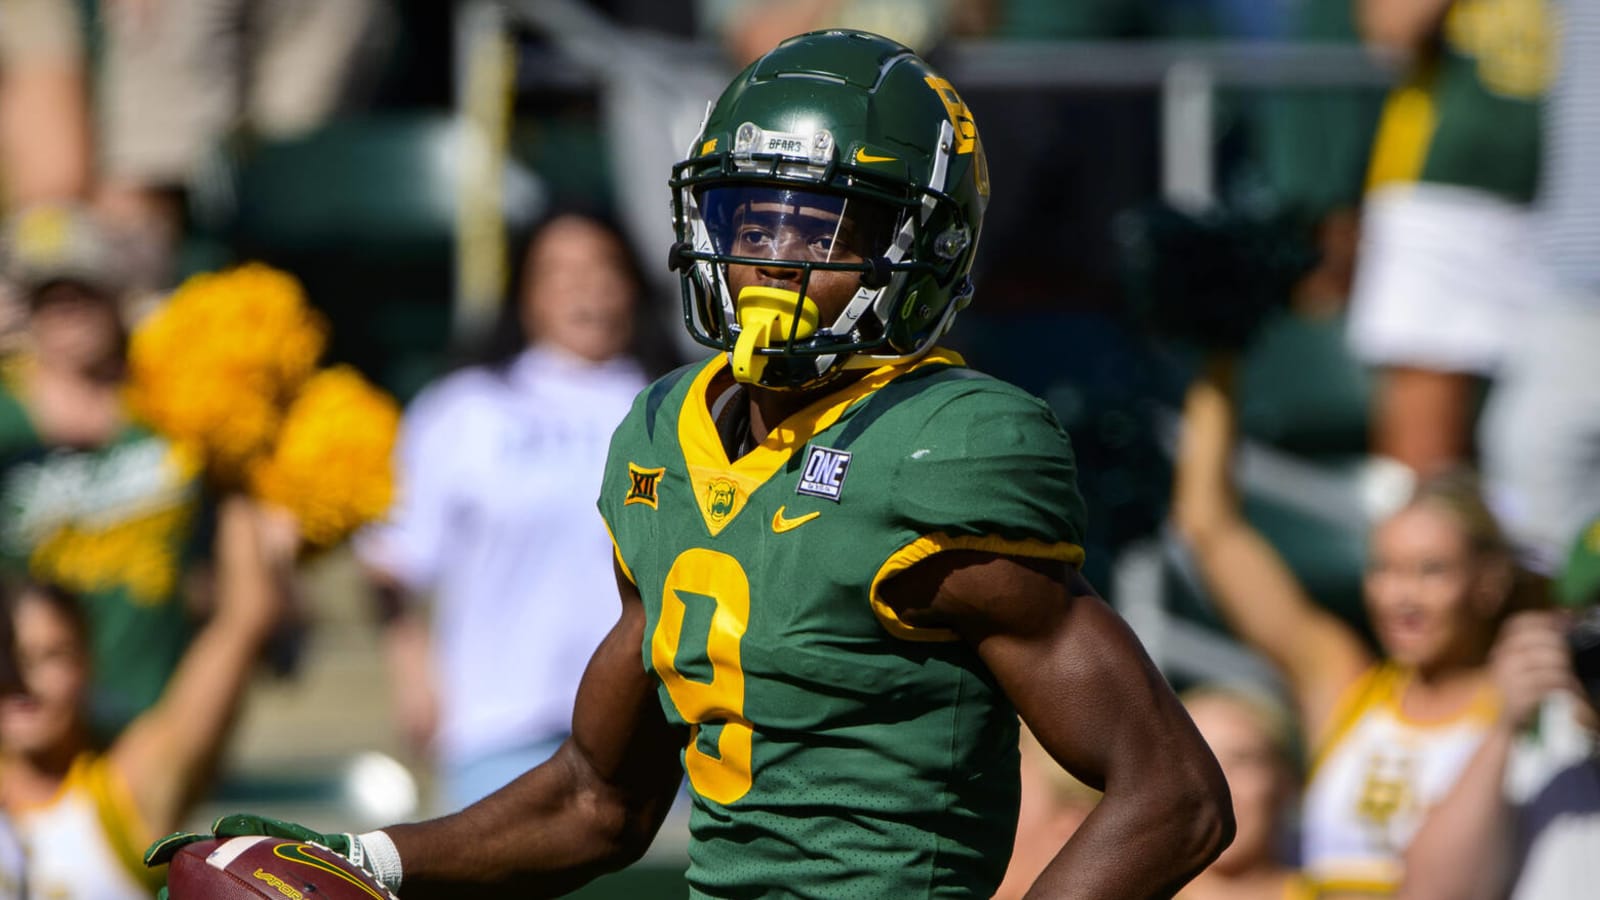 Patriots trade up to No. 50, draft Baylor WR Tyquan Thornton